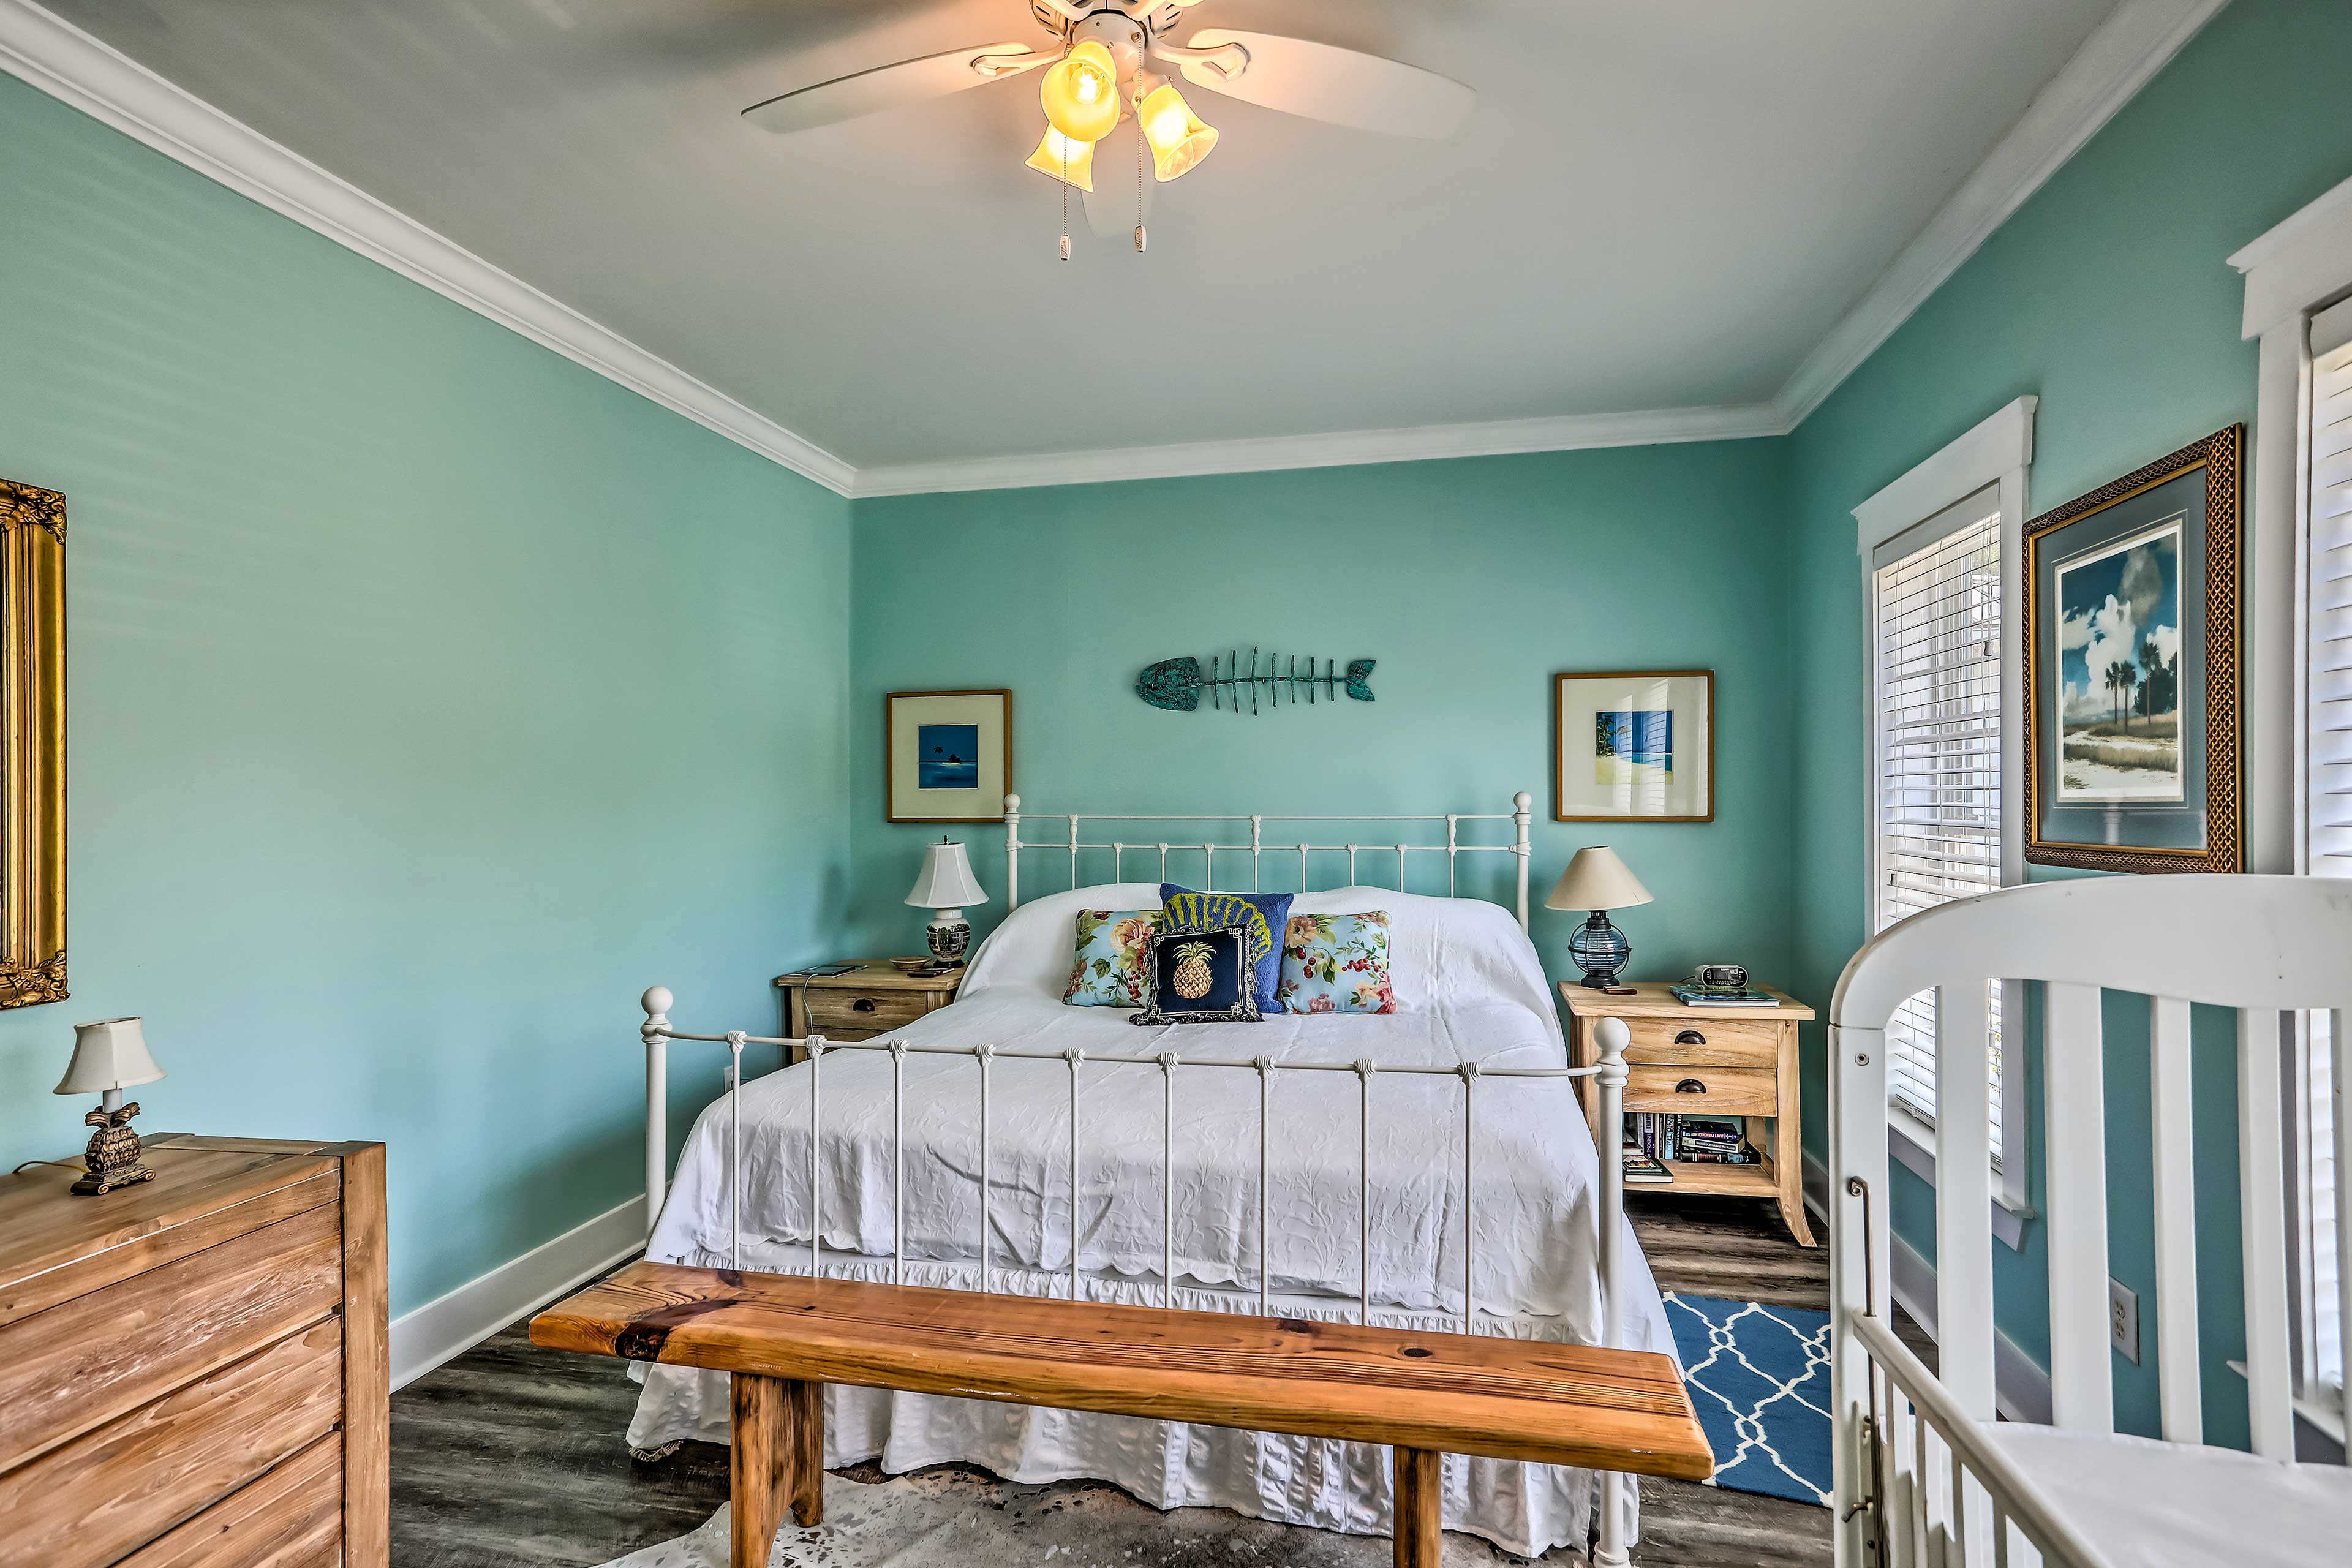 This ocean-inspired room brings the beach to you.